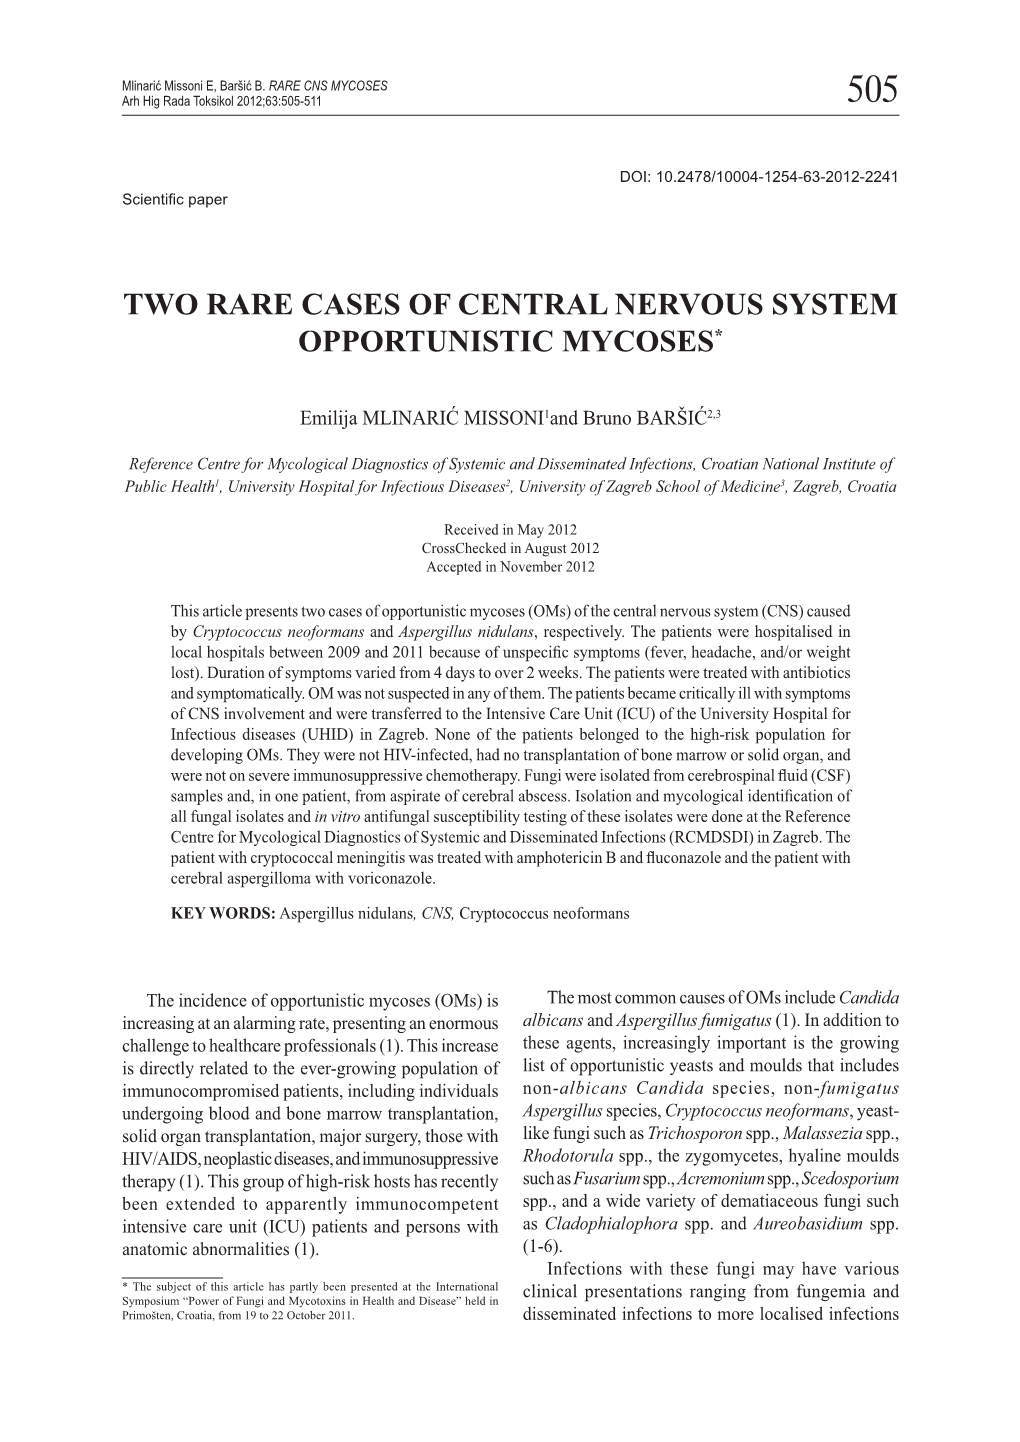 Two Rare Cases of Central Nervous System Opportunistic Mycoses*